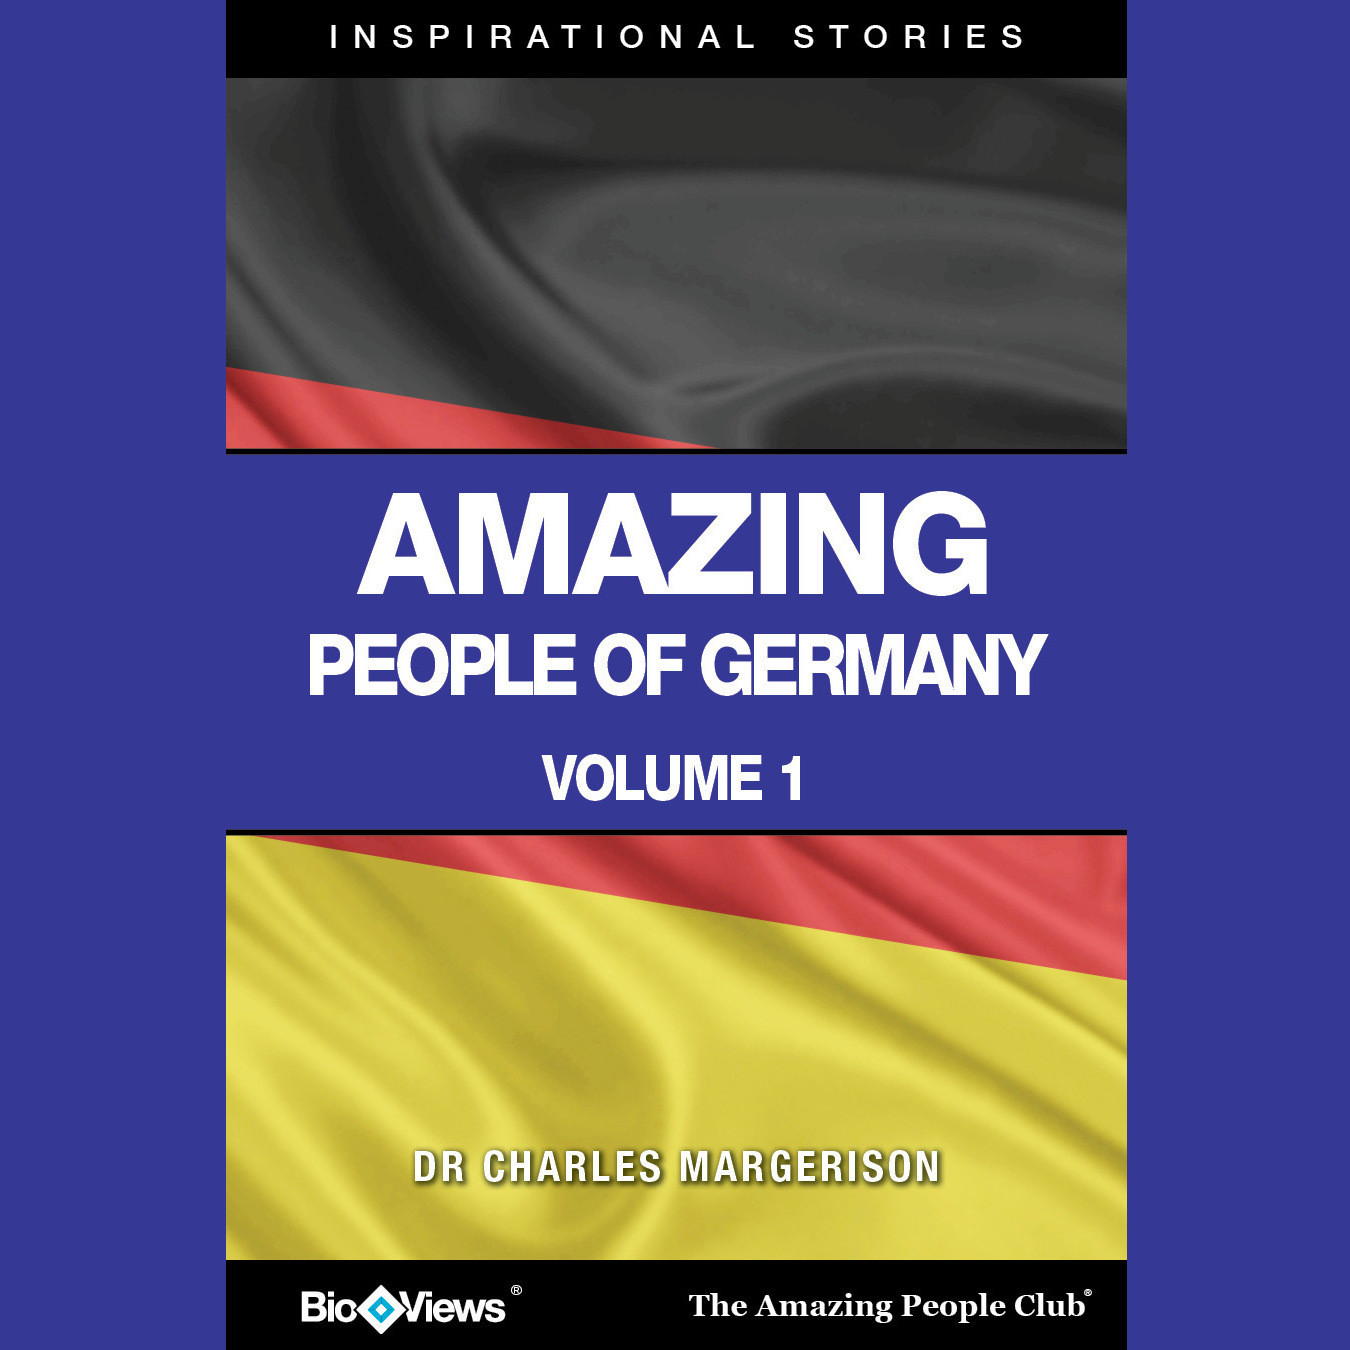 Amazing People of Germany, Vol. 1: Inspirational Stories Audiobook, by Charles Margerison